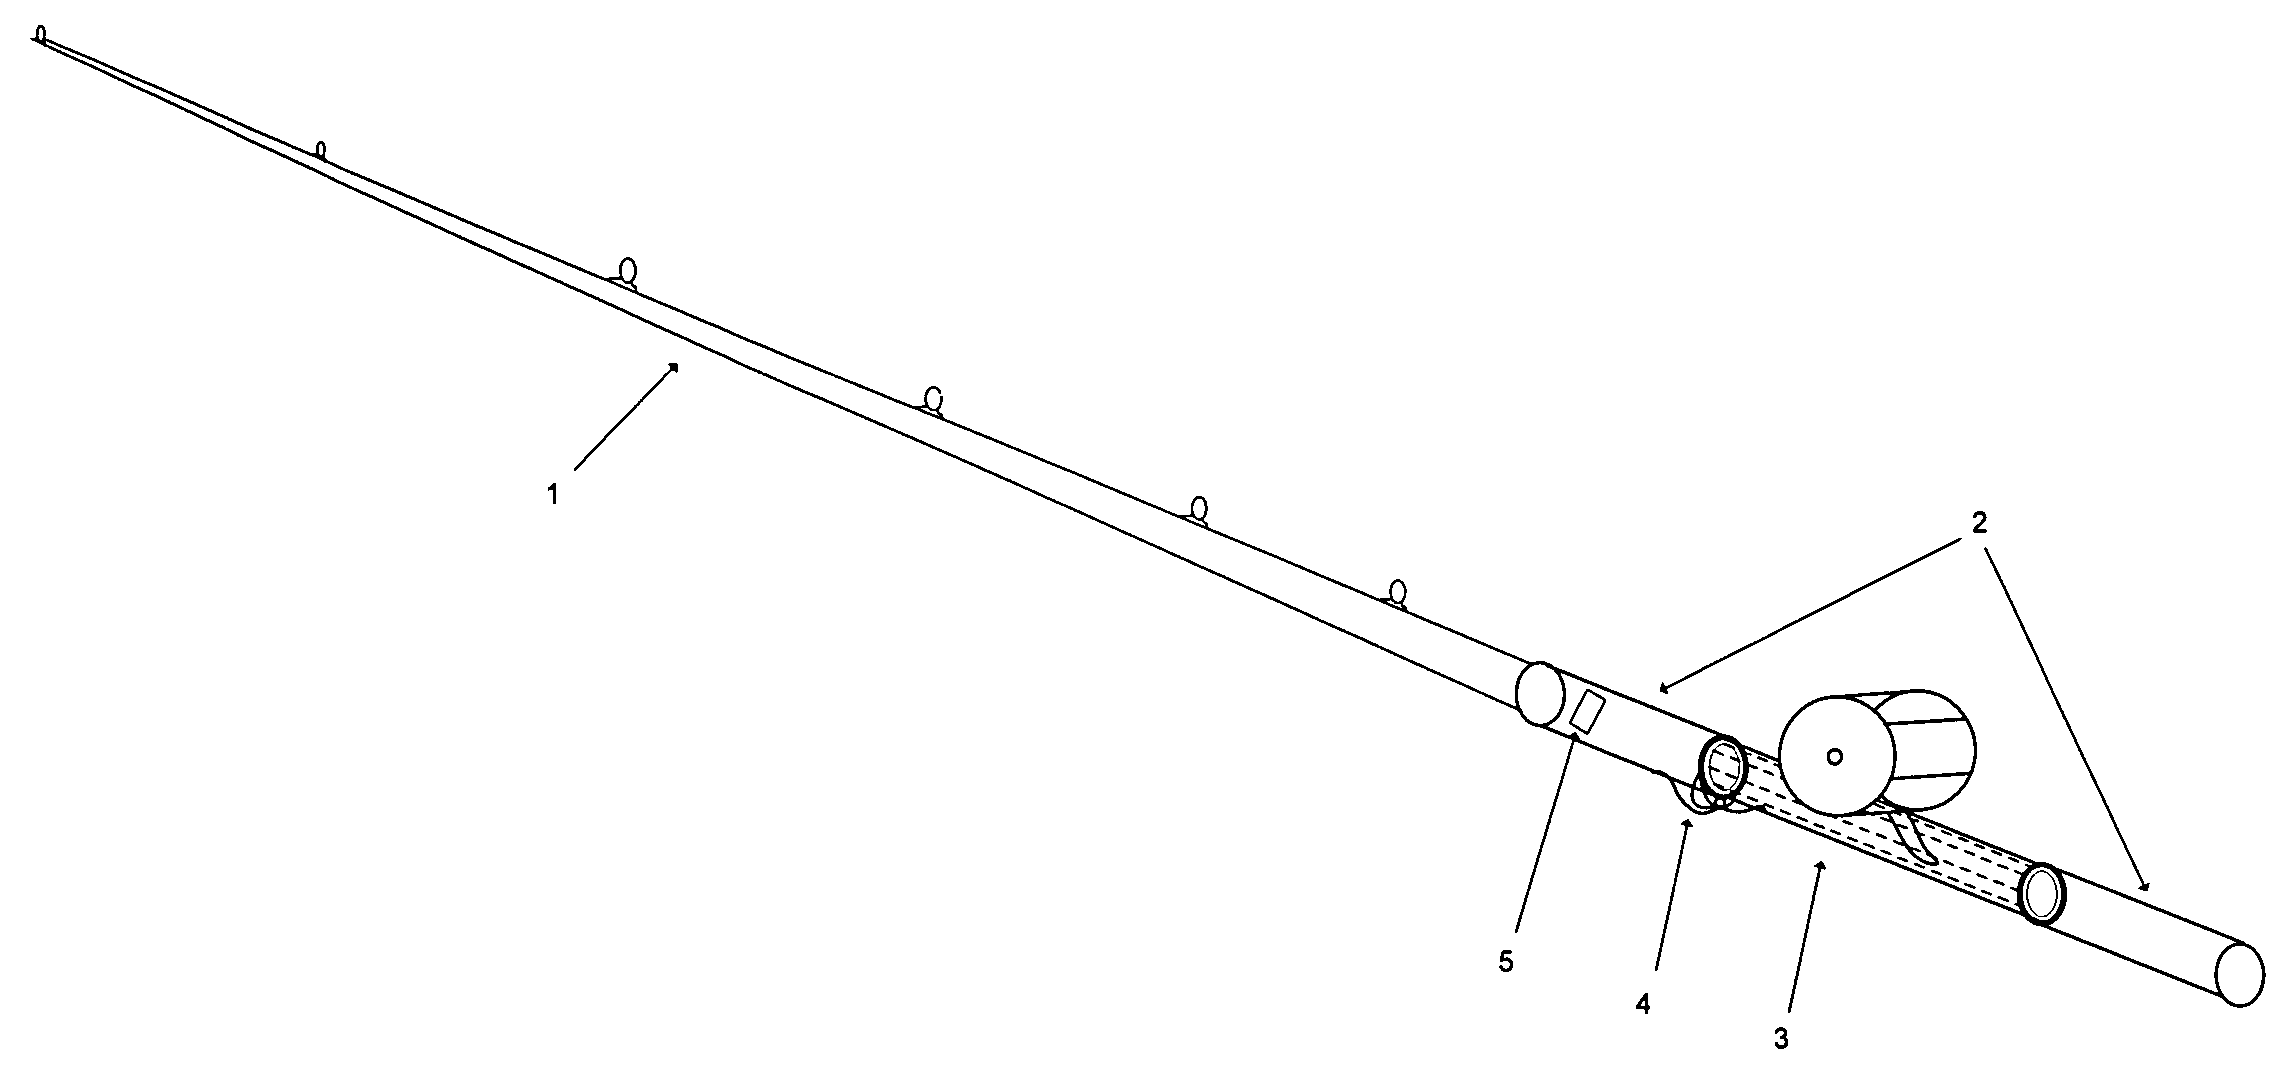 Fishing pole with integrated line tension scale